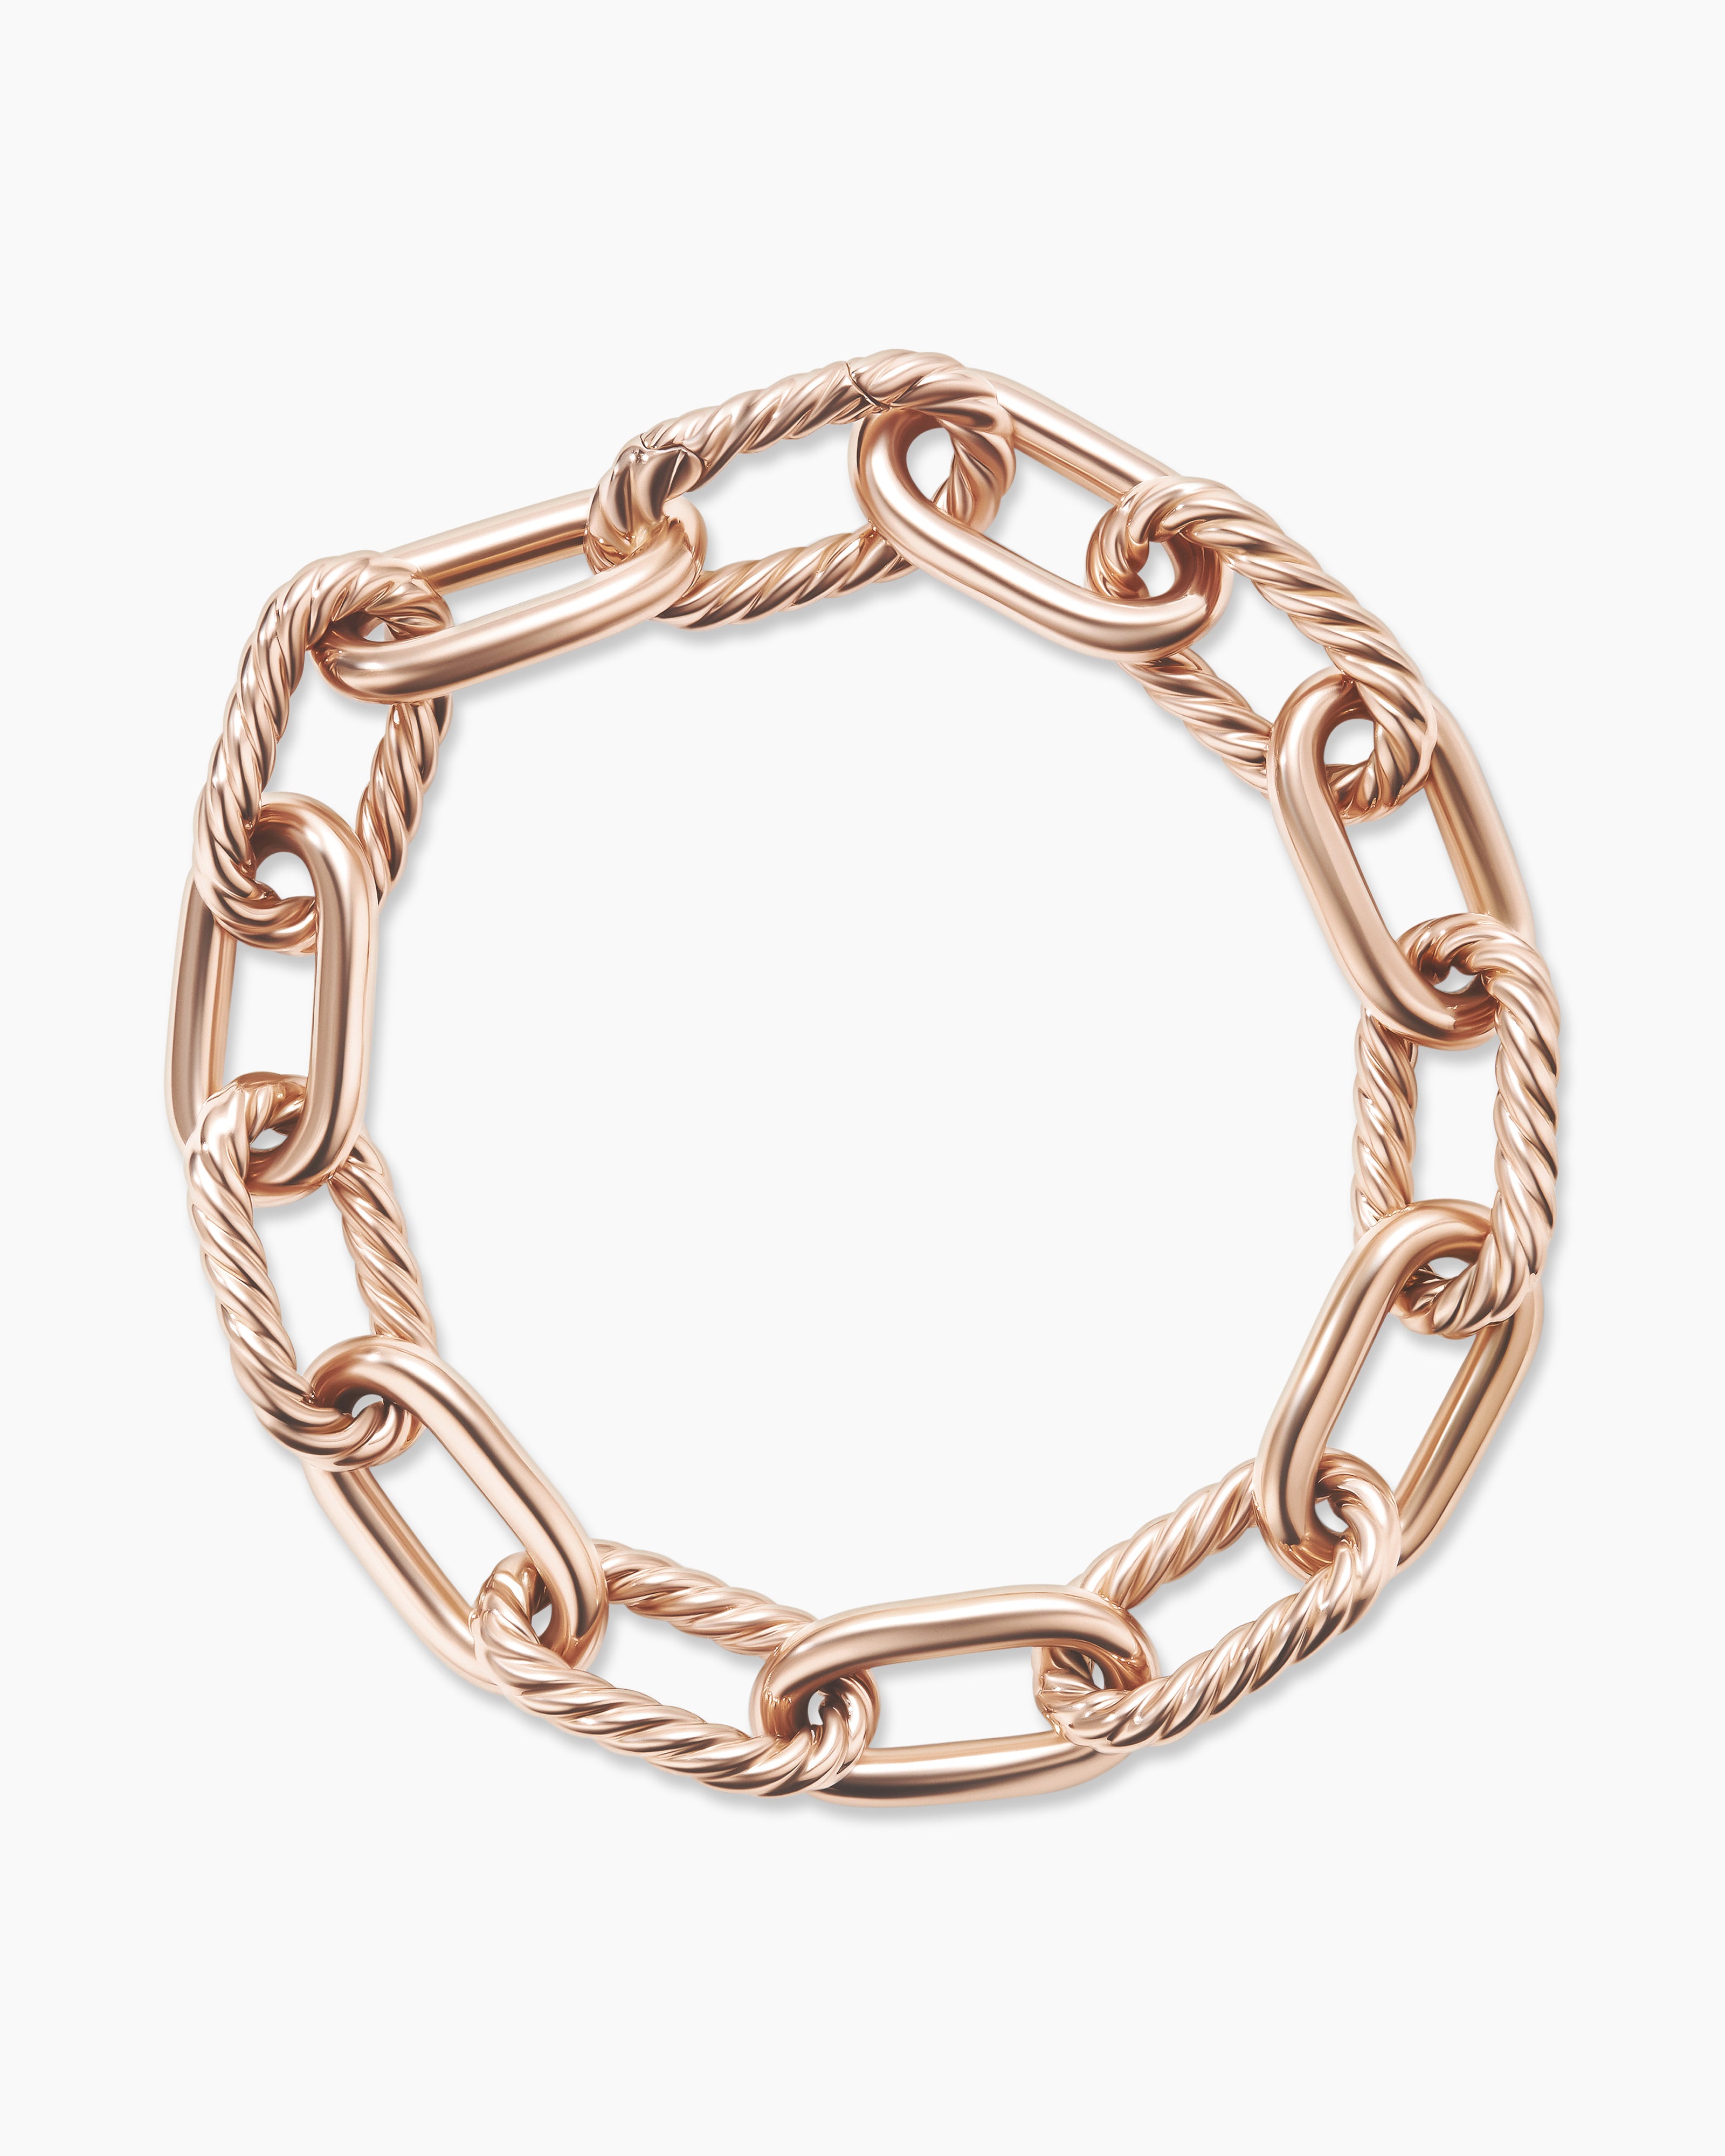 DY Madison Toggle Chain Bracelet in 18K Yellow Gold, 11mm